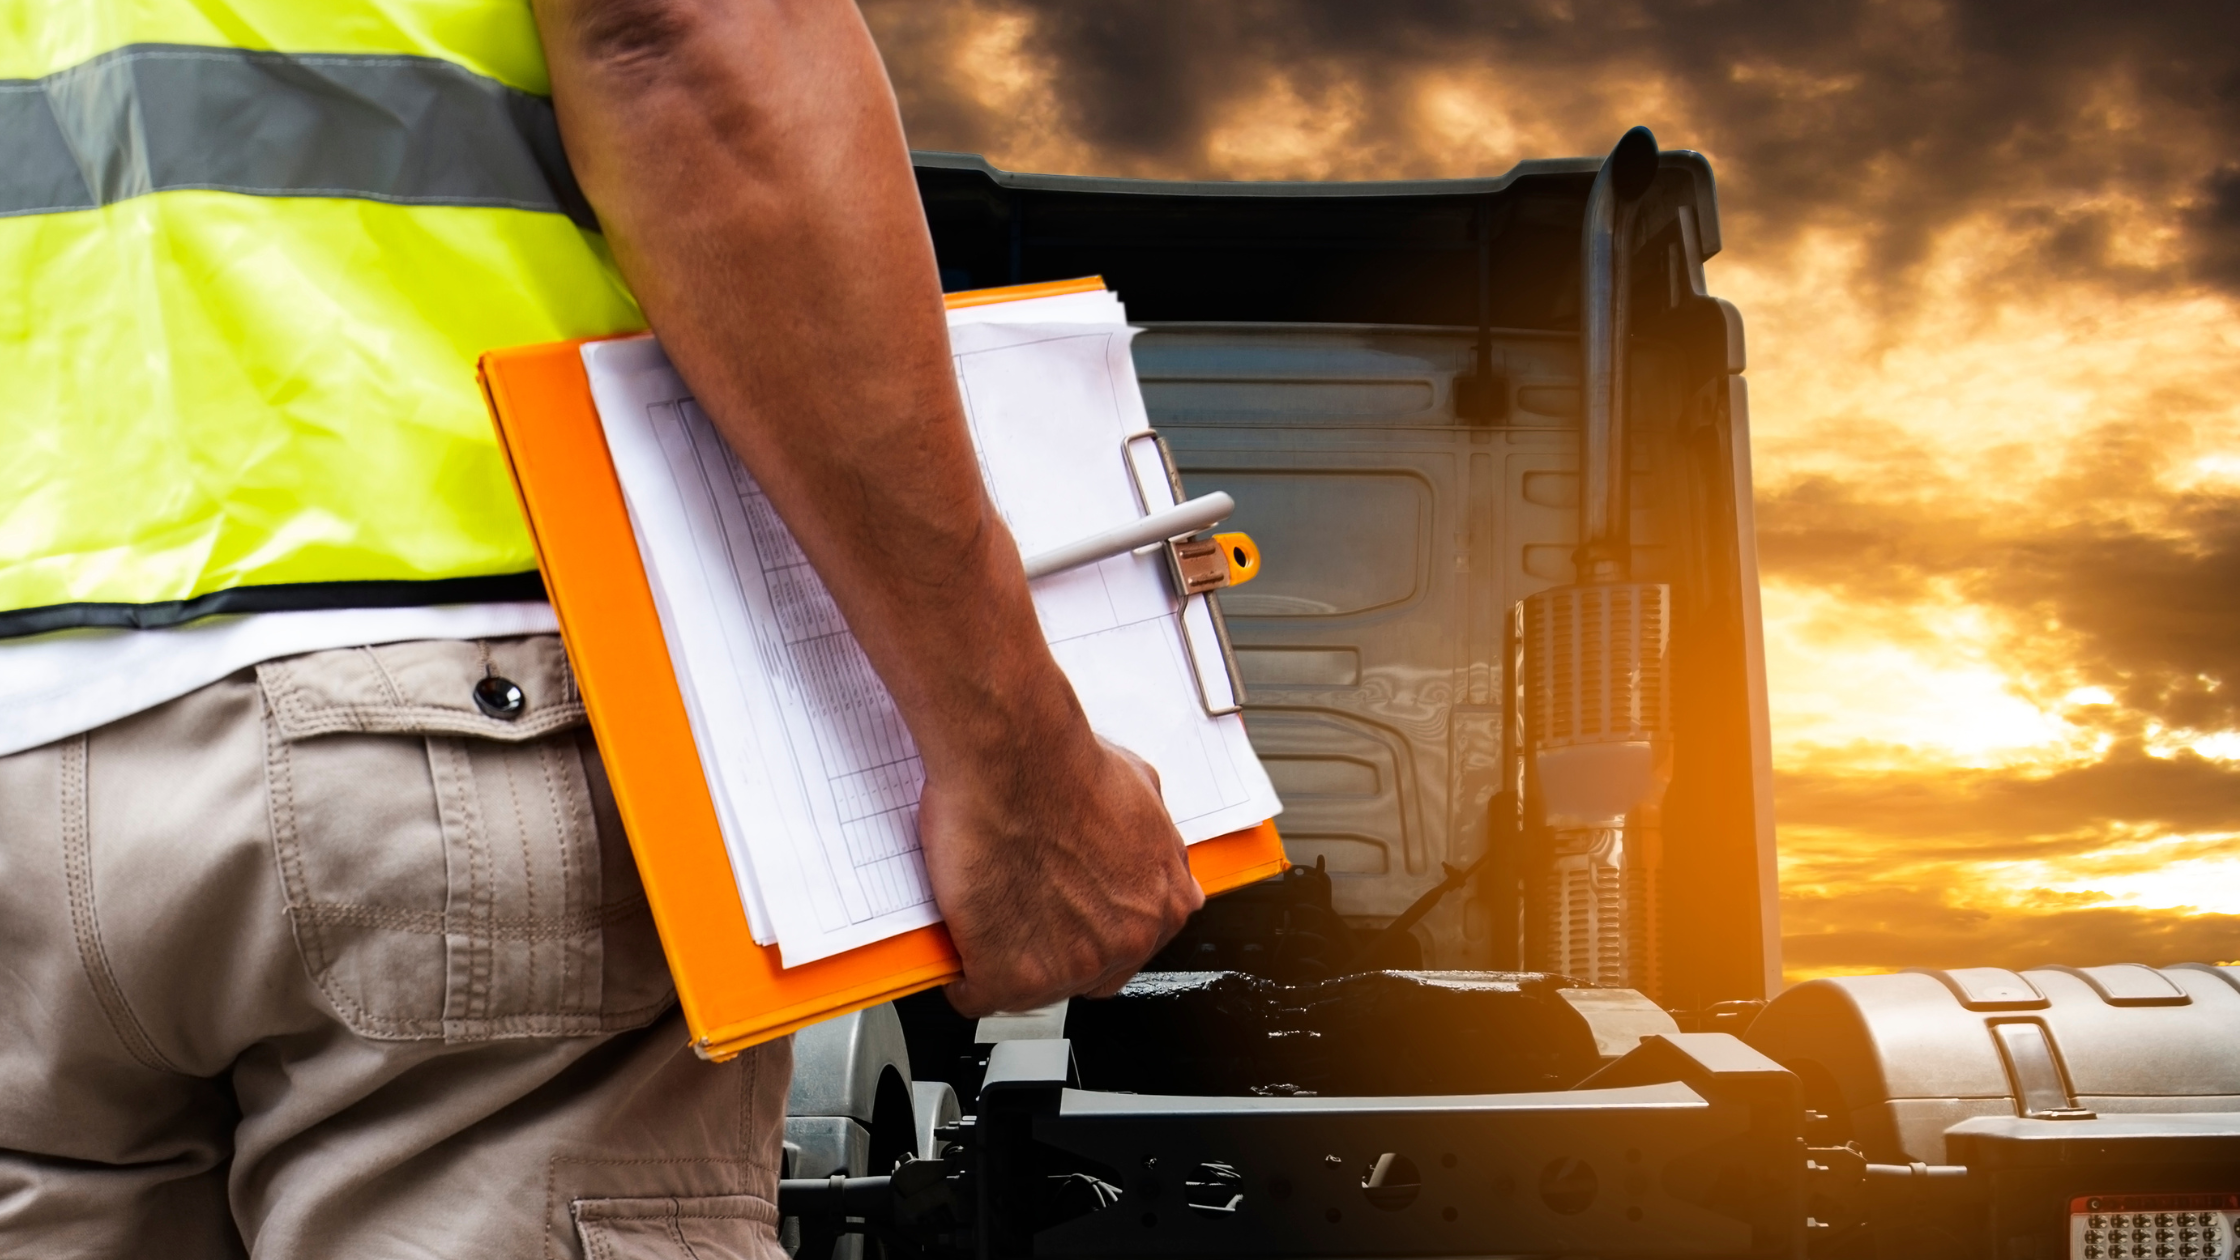 ISS: How authorities determine which trucking companies to inspect.